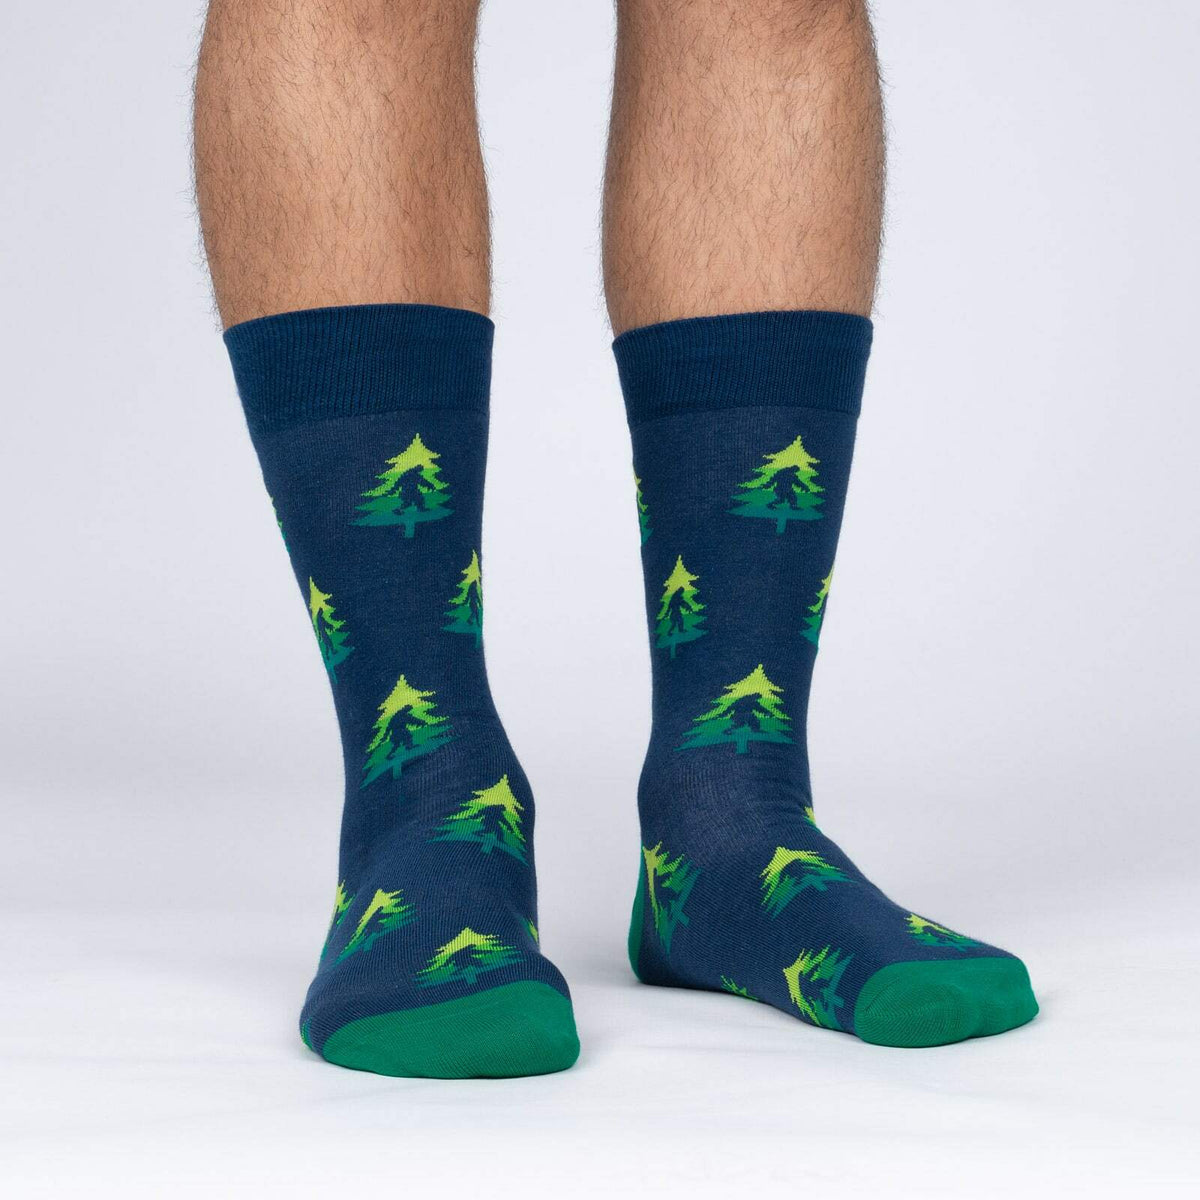 Sock It To Me Do You Tree What I Tree men&#39;s crew sock featuring blue sock with green trees that have a Sasquatch silhouette inside them. Socks worn by model seen from the front. 